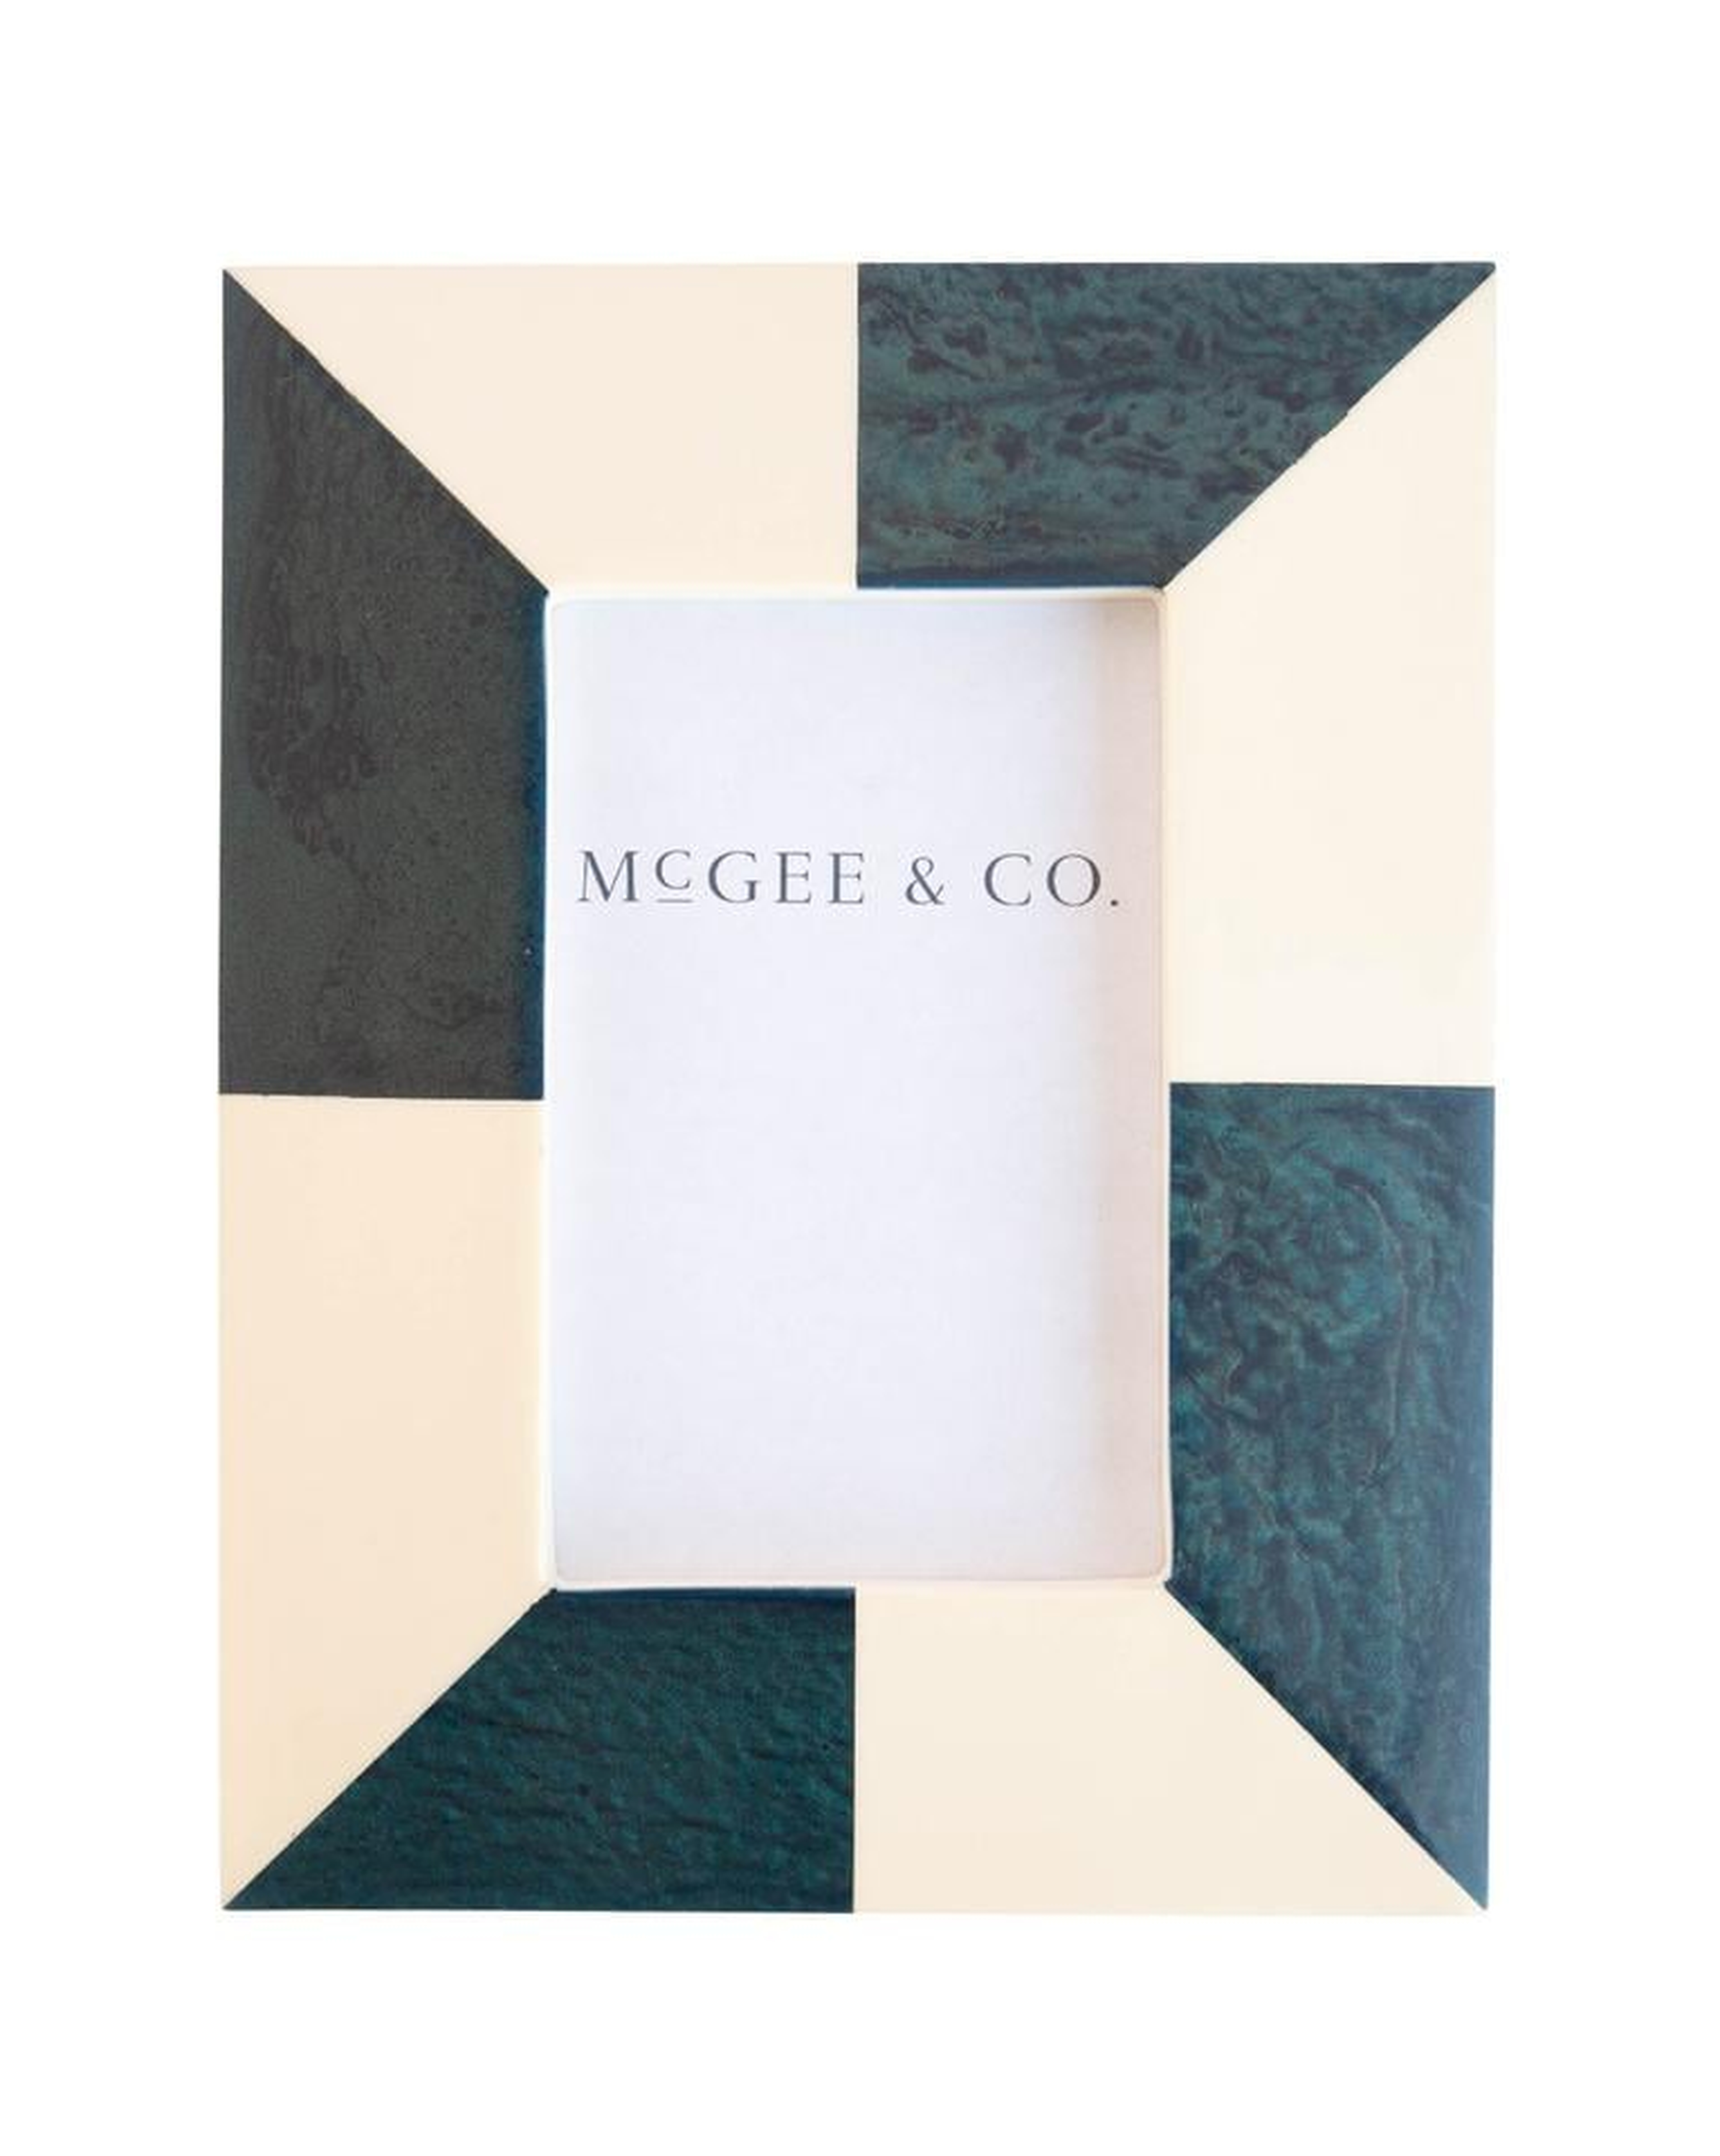 COLORBLOCK FRAME - 4" x 6" - McGee & Co.